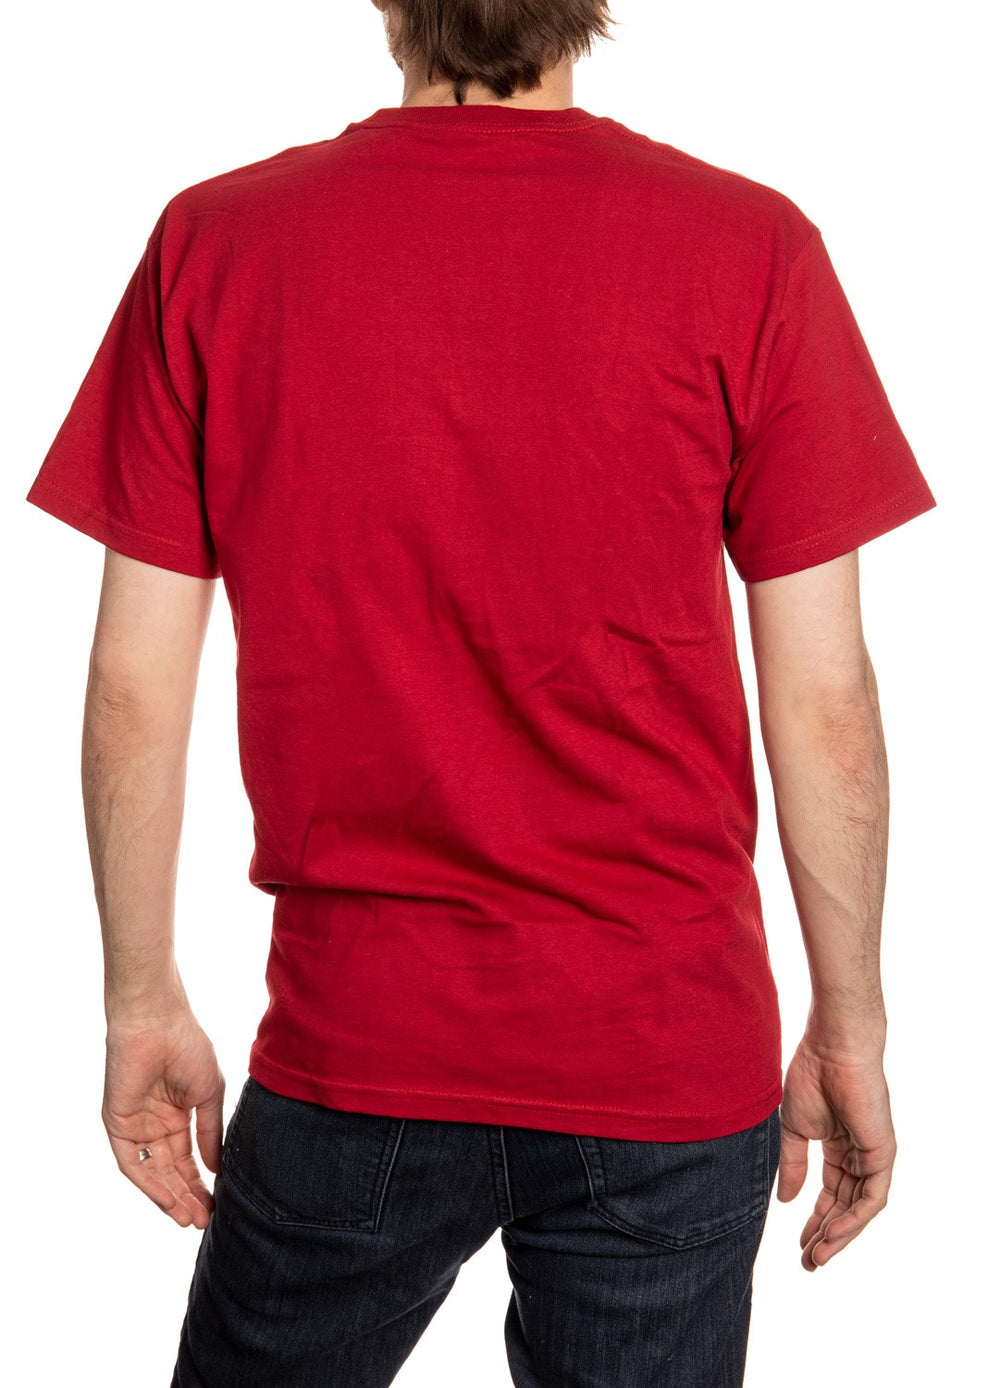 Rickards Red Classic Logo T-Shirt Back View.